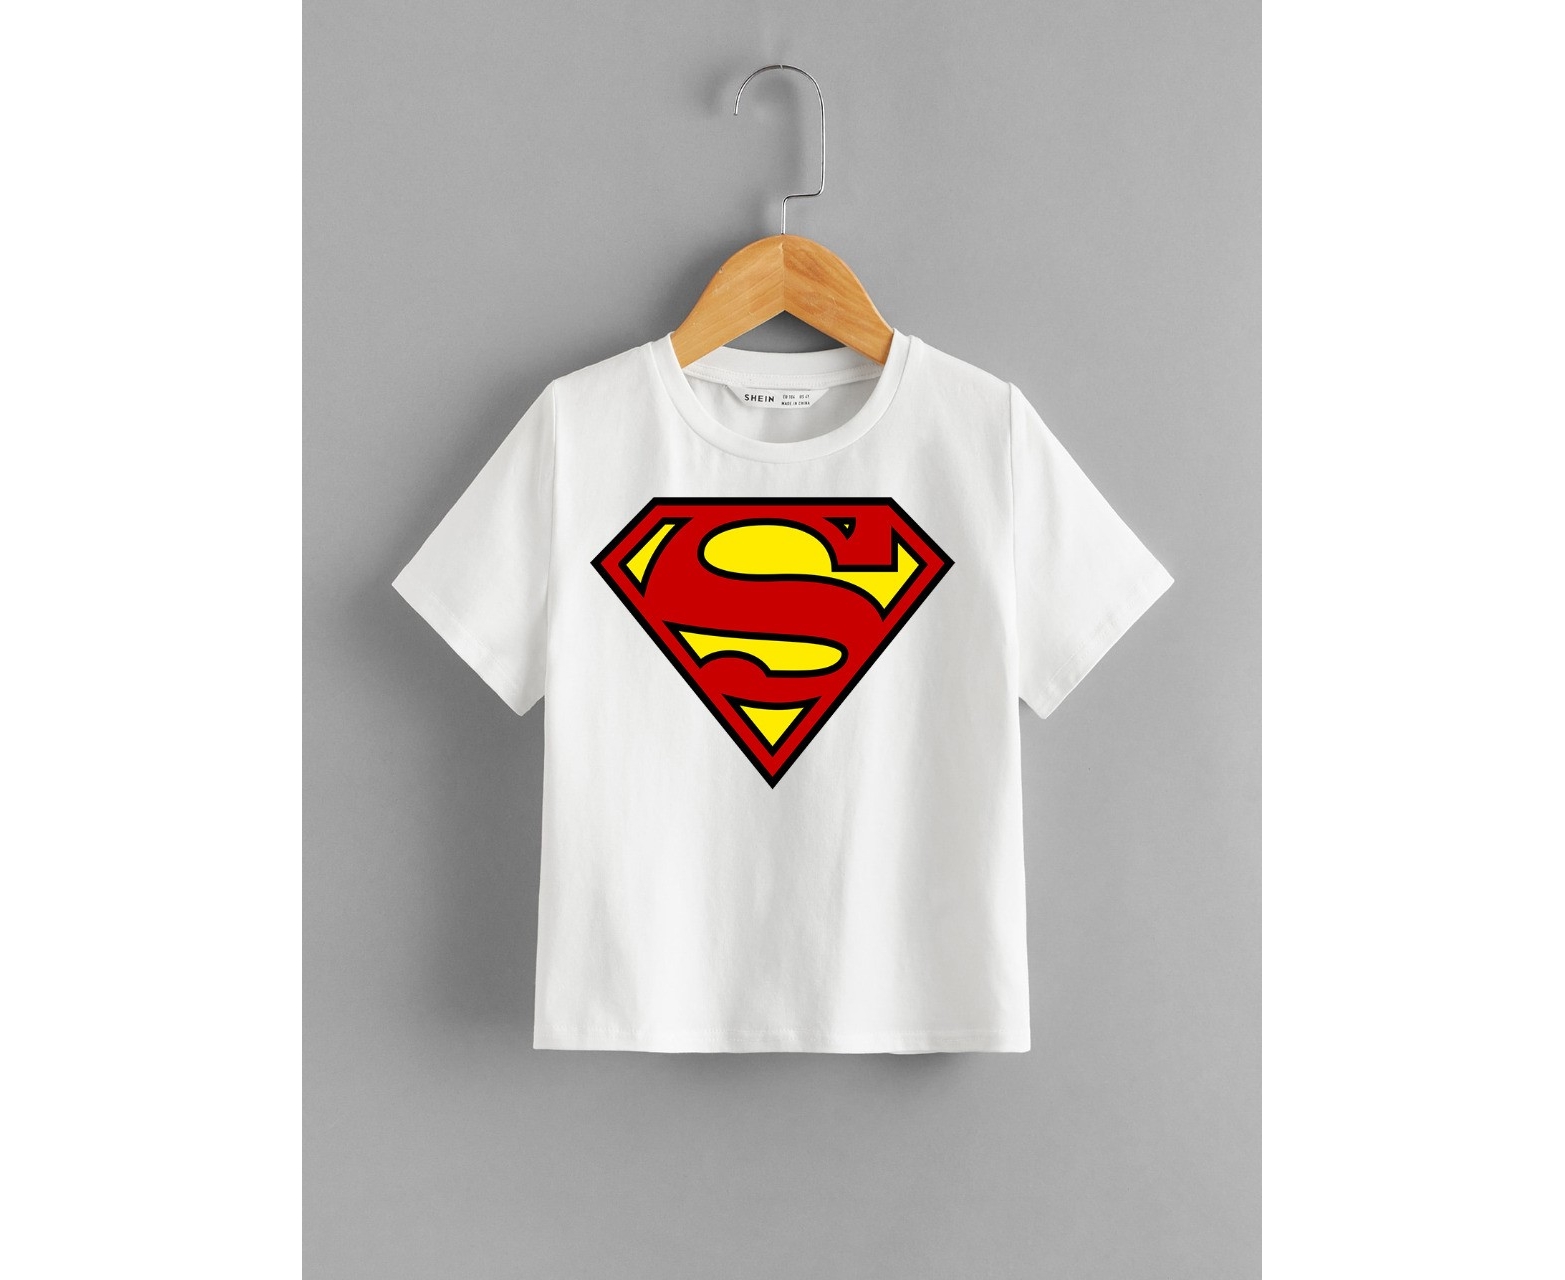 Best Collection of Stylish Printed T-shirts for Kids 2021